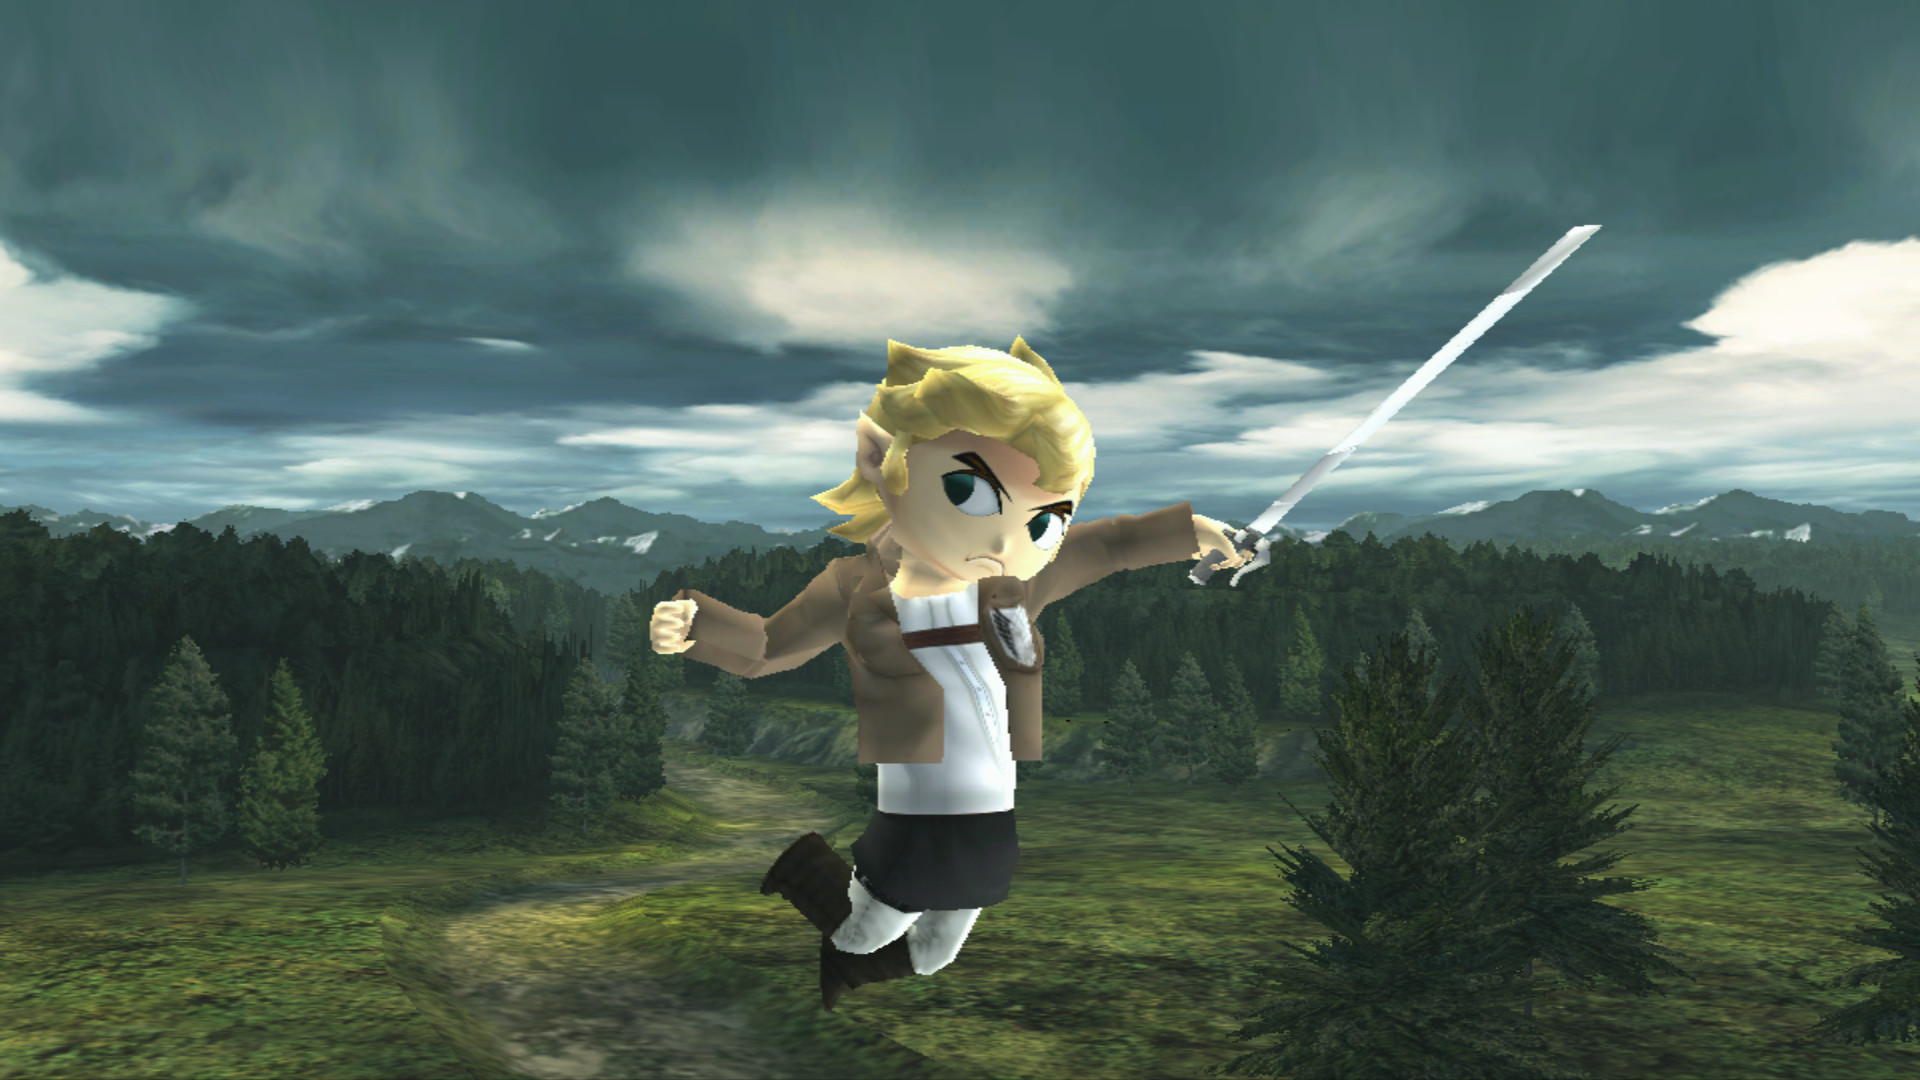 Toon Link wearing the Scouting Legion outfit from Attack on Titan. Has versions with and without 3D Maneuver Gear